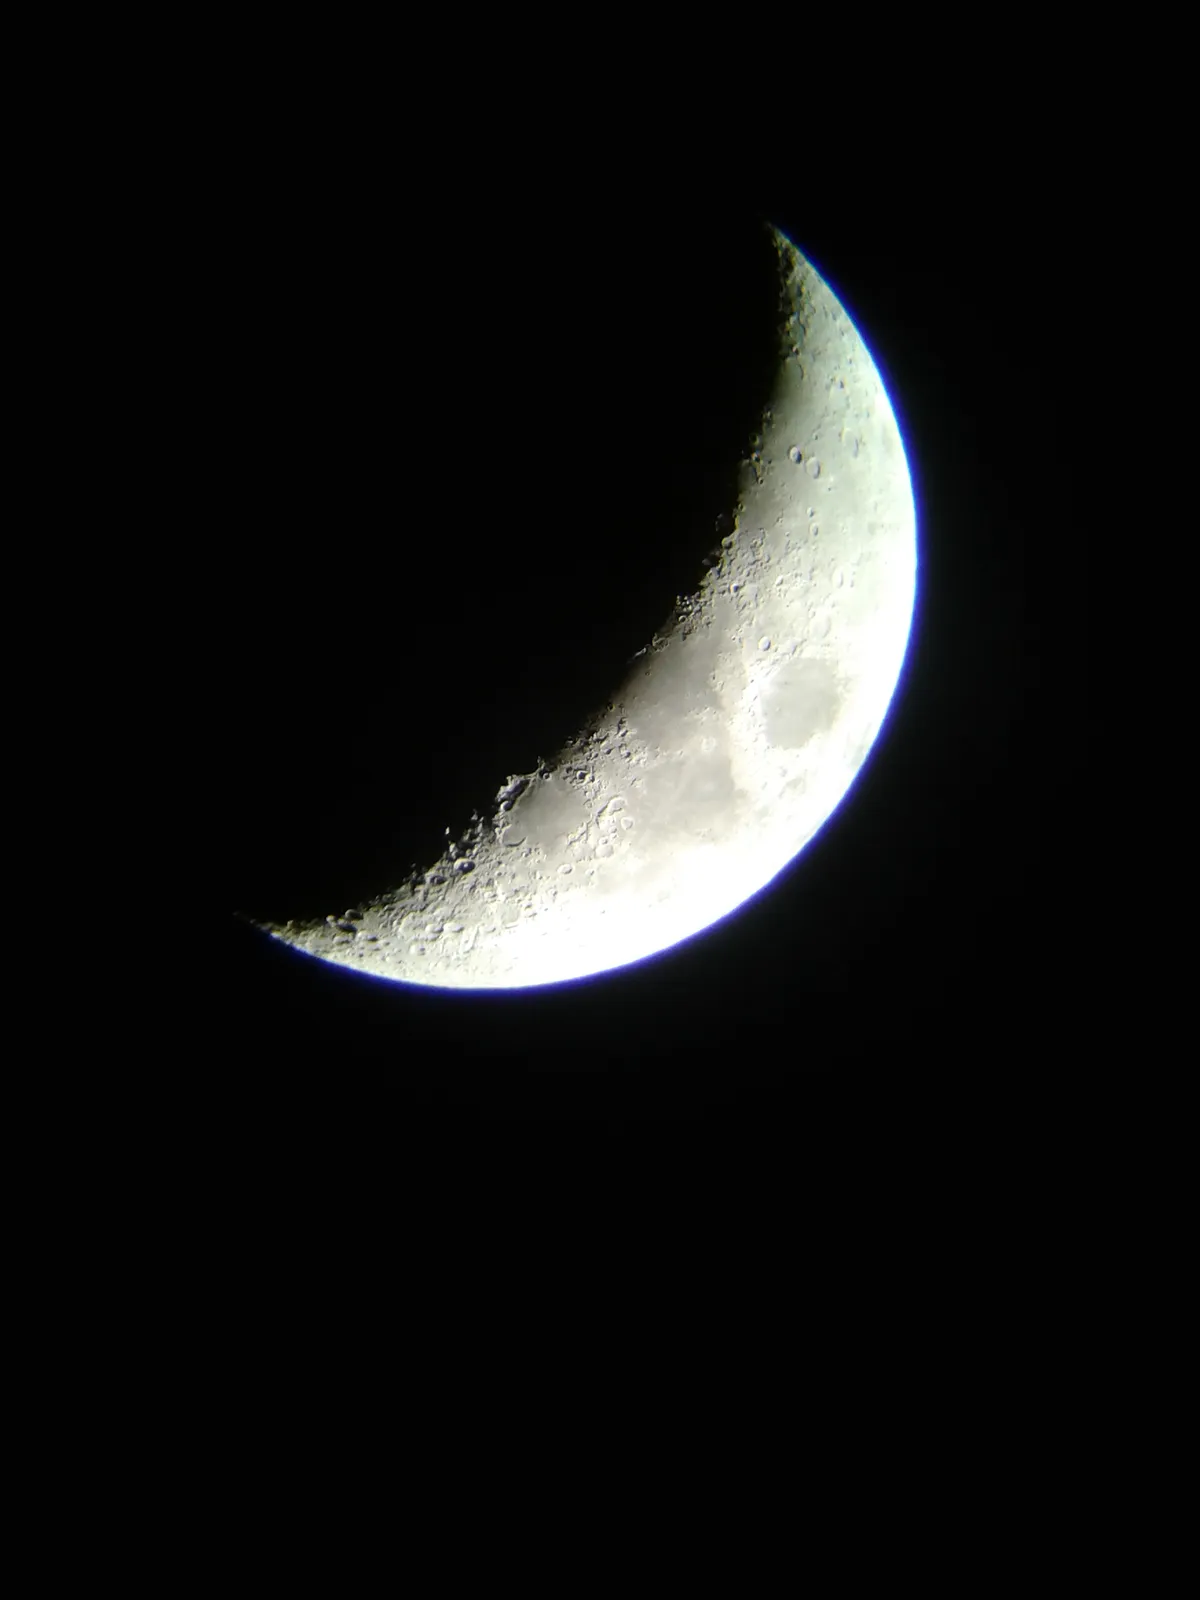 The Moon by Jack Reeves (aged 14), UK. Equipment: Celestron Astromaster 90 AZ mount, smartphone.